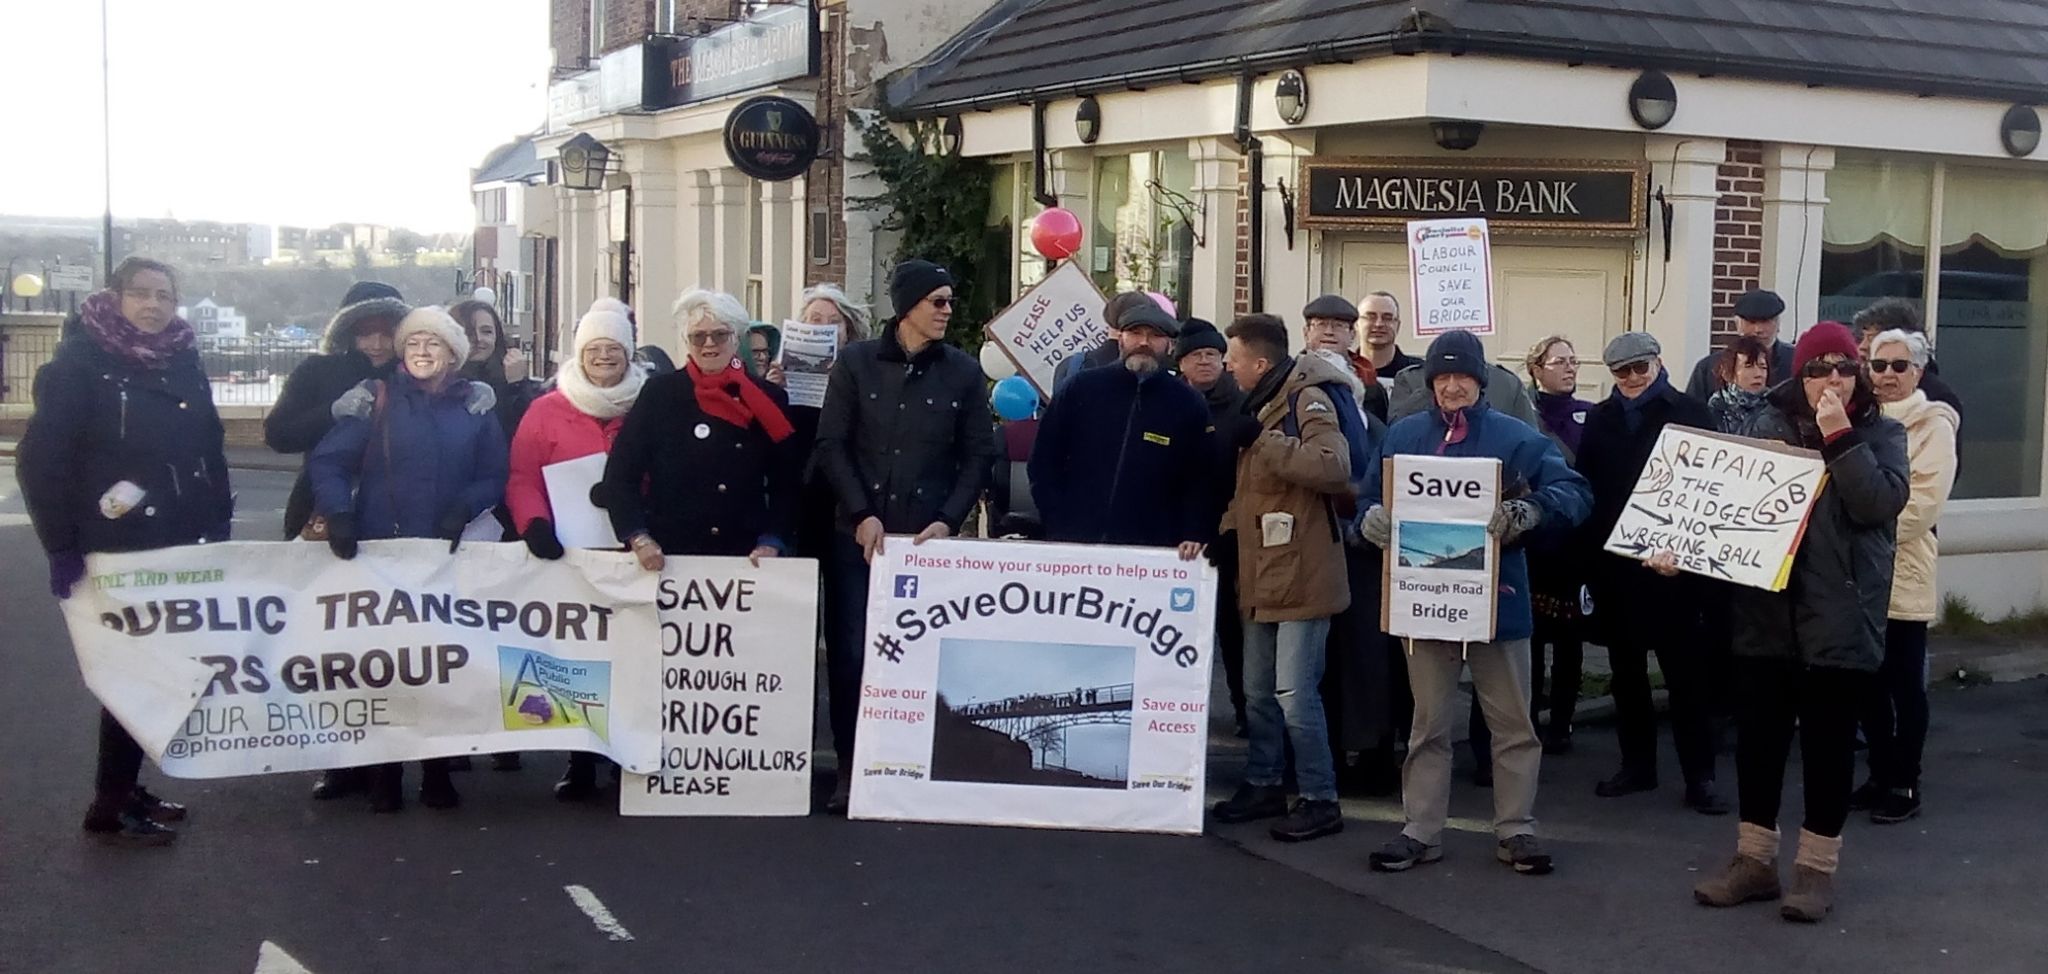 Members of the Save Our Bridge group holding banners and signs